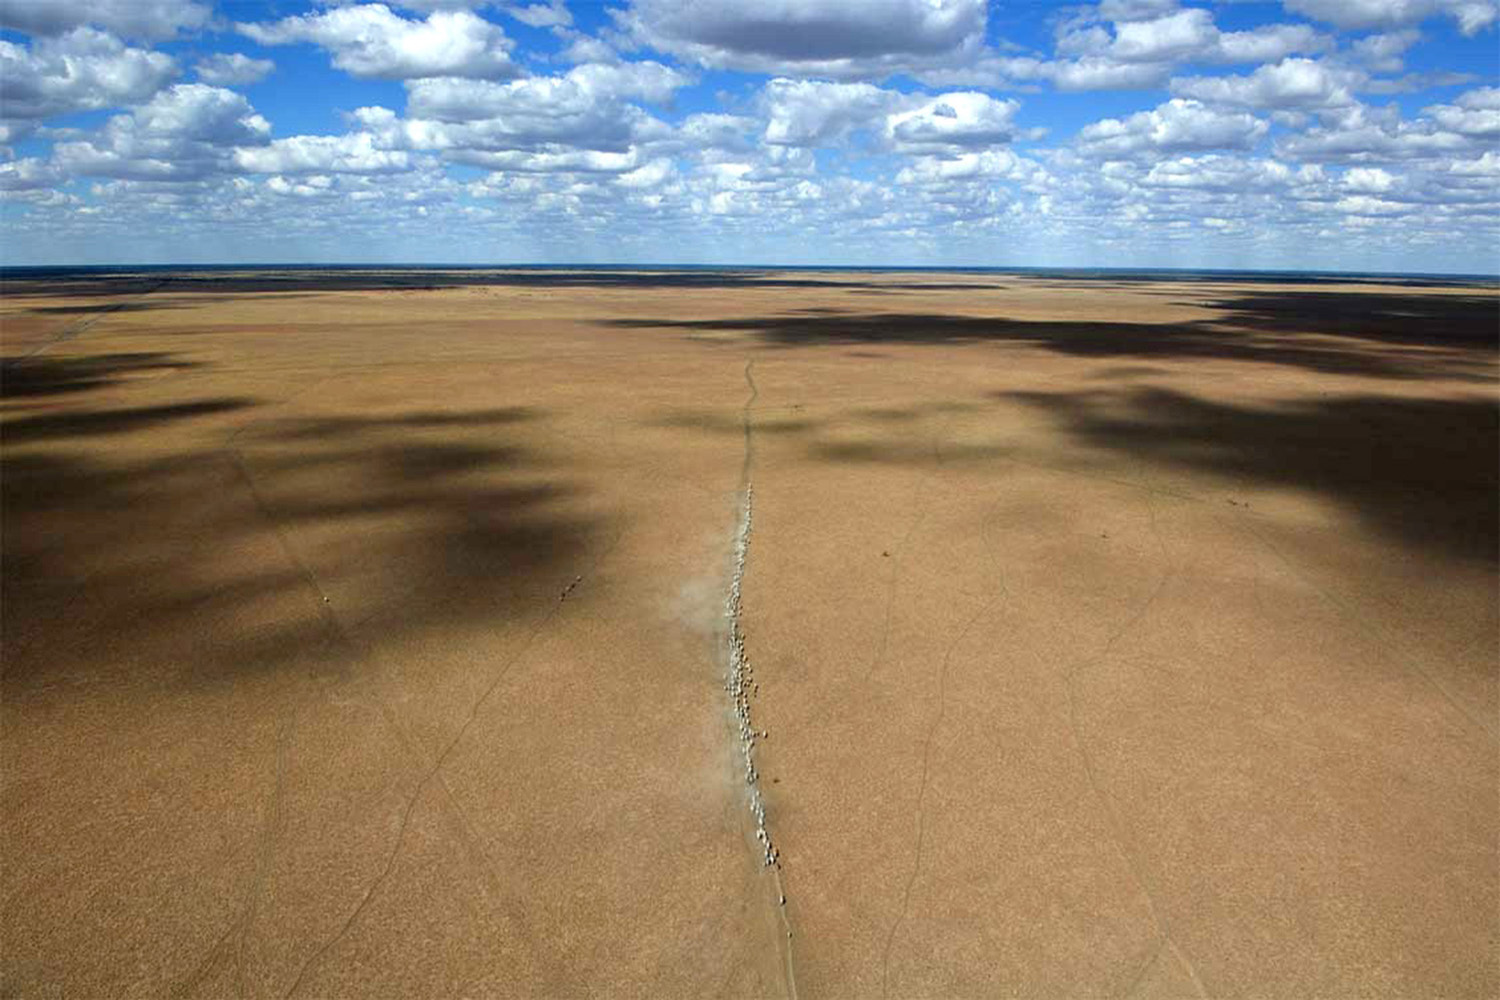 image of AARONTAIT COPYRIGHTED 2014 377 RURAL PHOTOGRAPHER FARM LIFE AGRICULTURE WOOL BEEF STOCKMAN MUSTER CATTLE FARM AUSTRALIAN EPIC VAST GULF AERIAL MUSTER